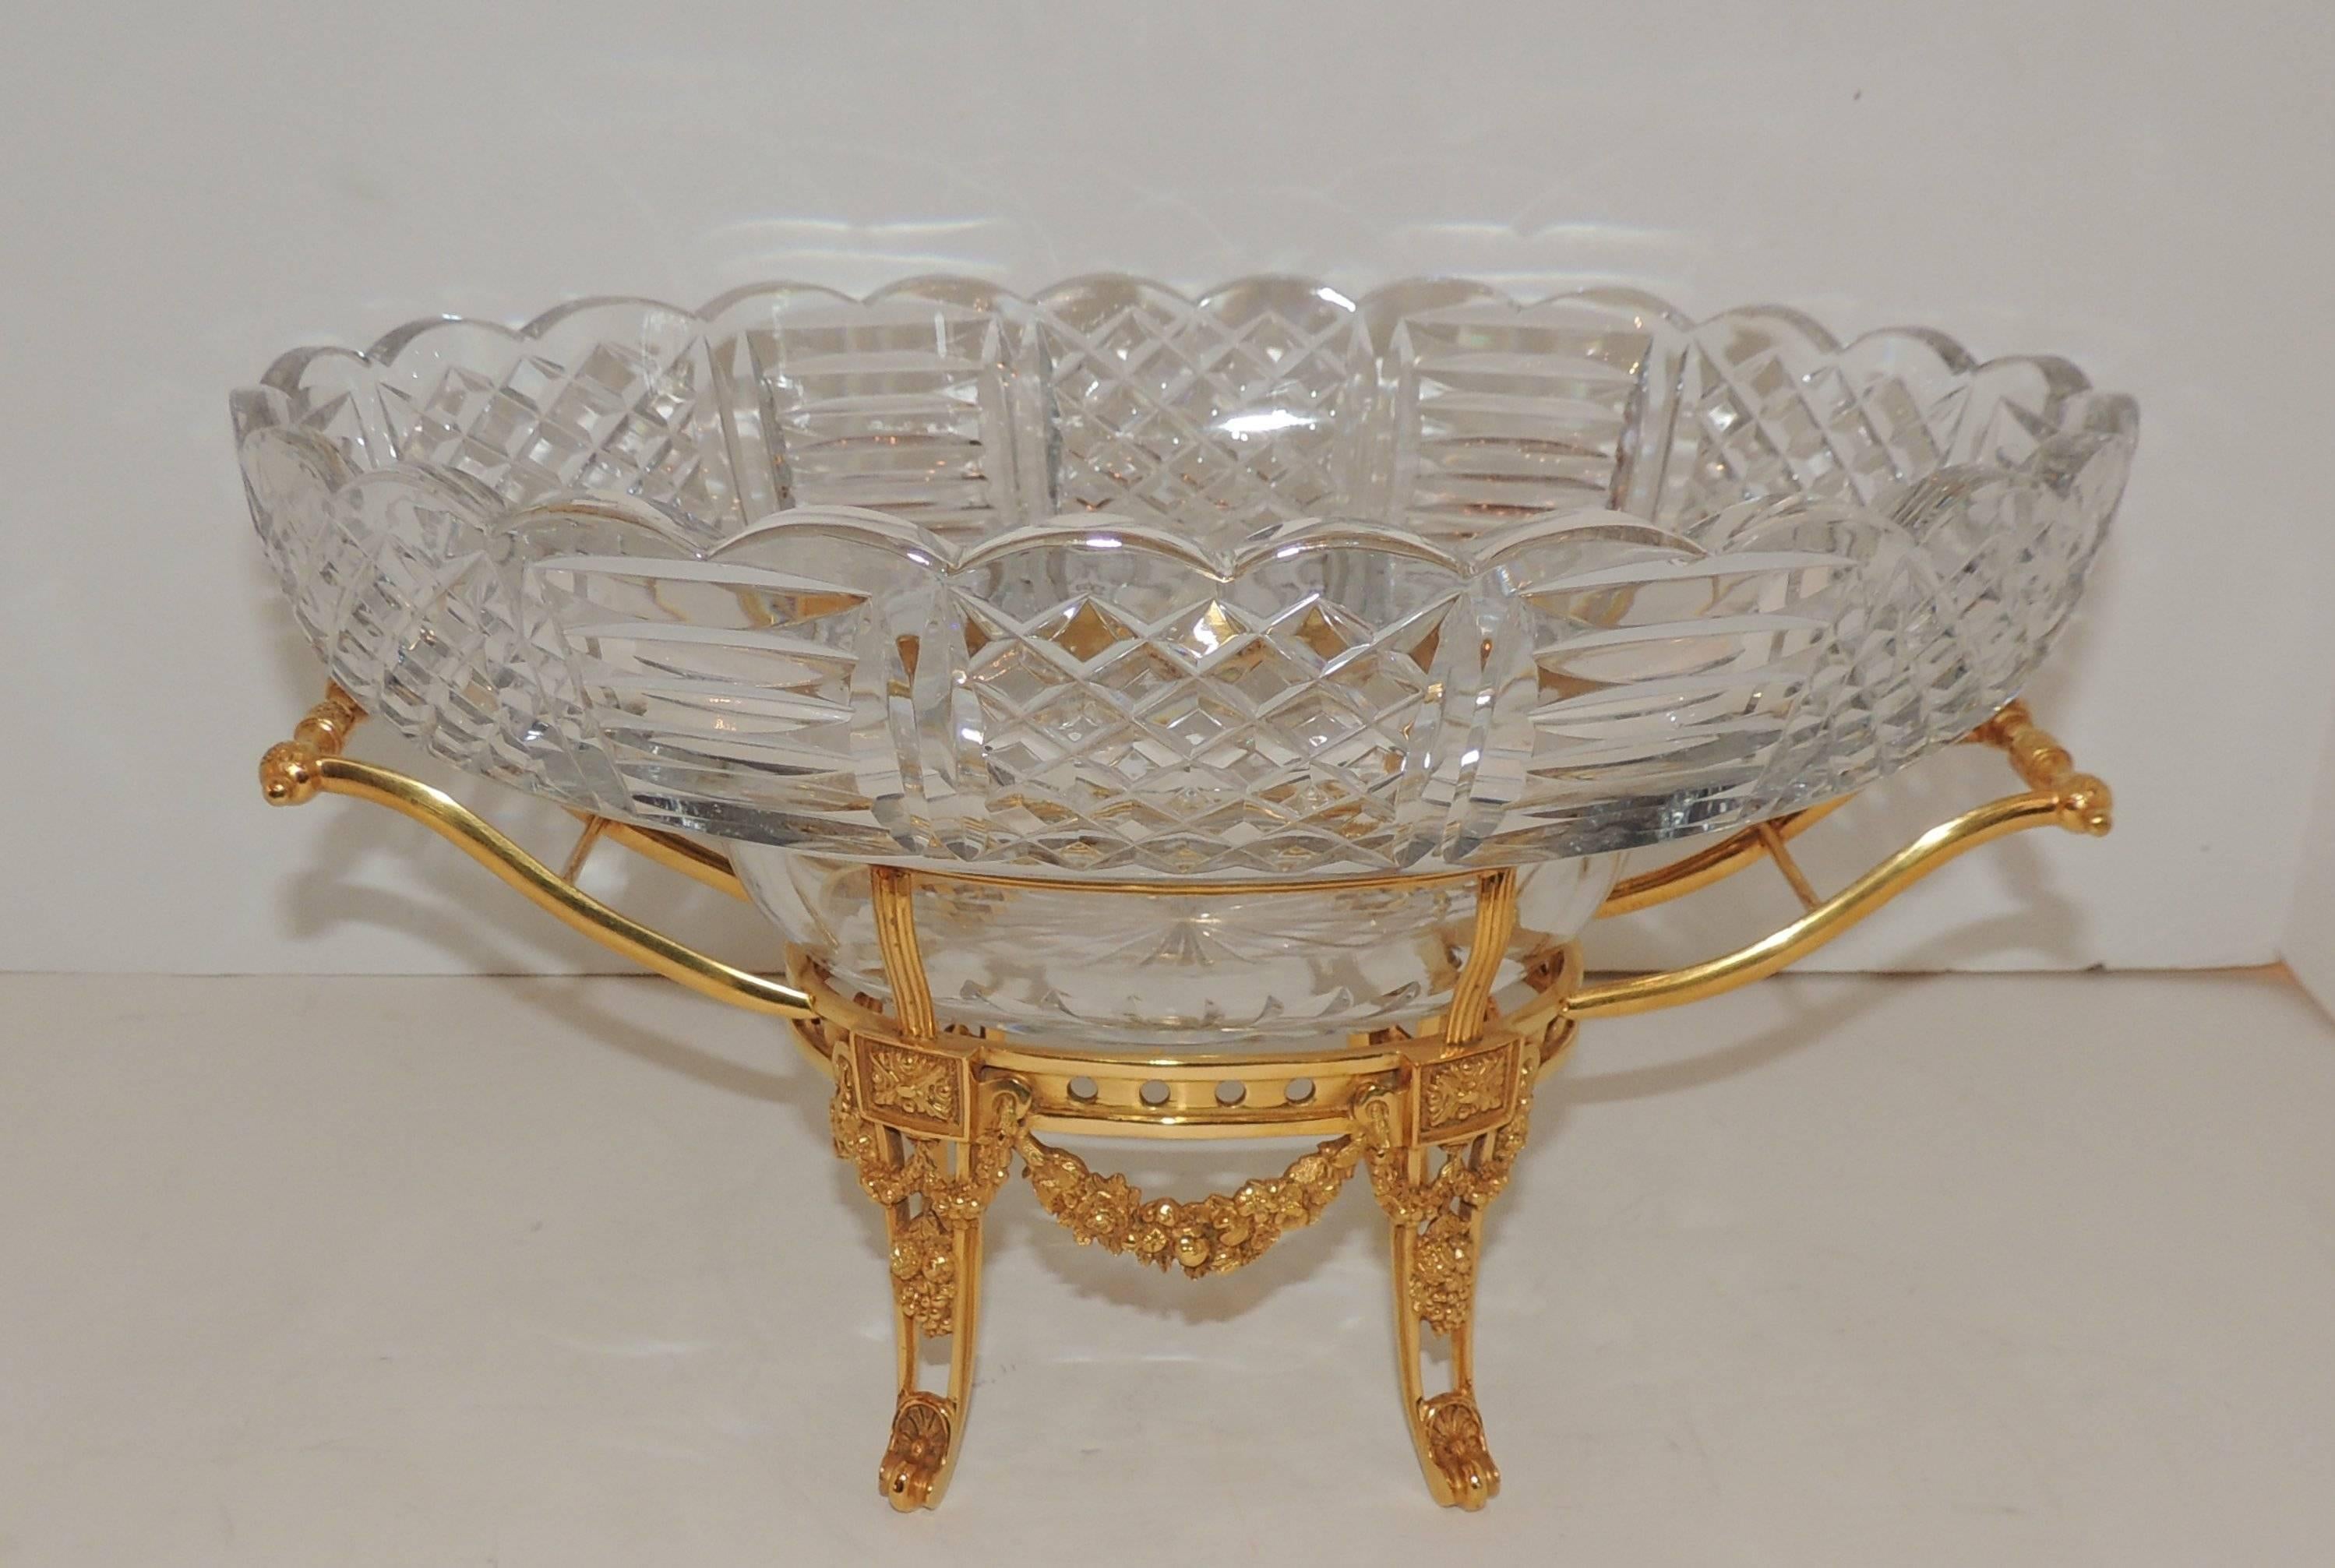 Delicate French dore bronze filigree swag and wreaths on handled frame hold the multi faceted cut crystal insert and scalloped top edge.
Beautiful piece for your home or office.

Measures: 13" L x 7.5" H x 8.5" D.